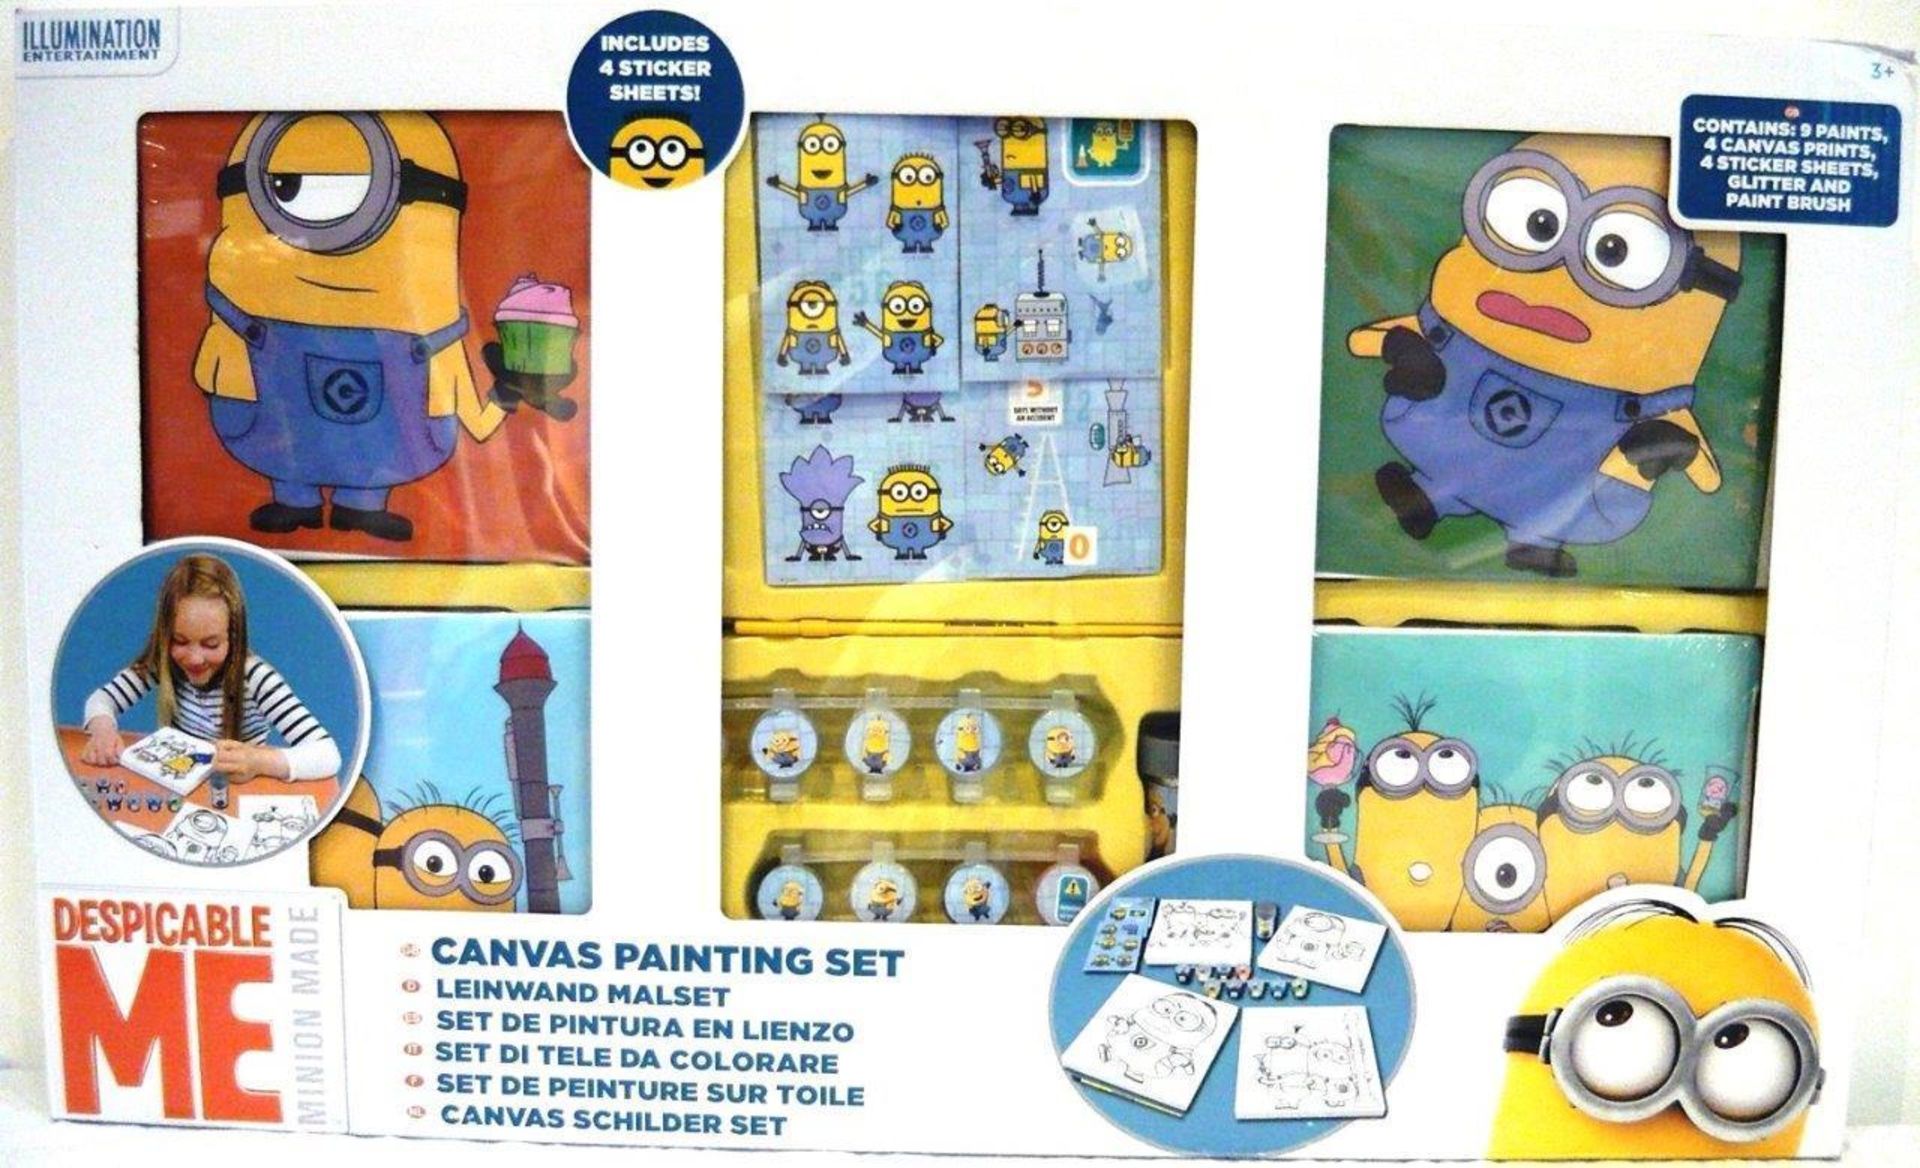 Dispicable me canvas painting set - damaged box